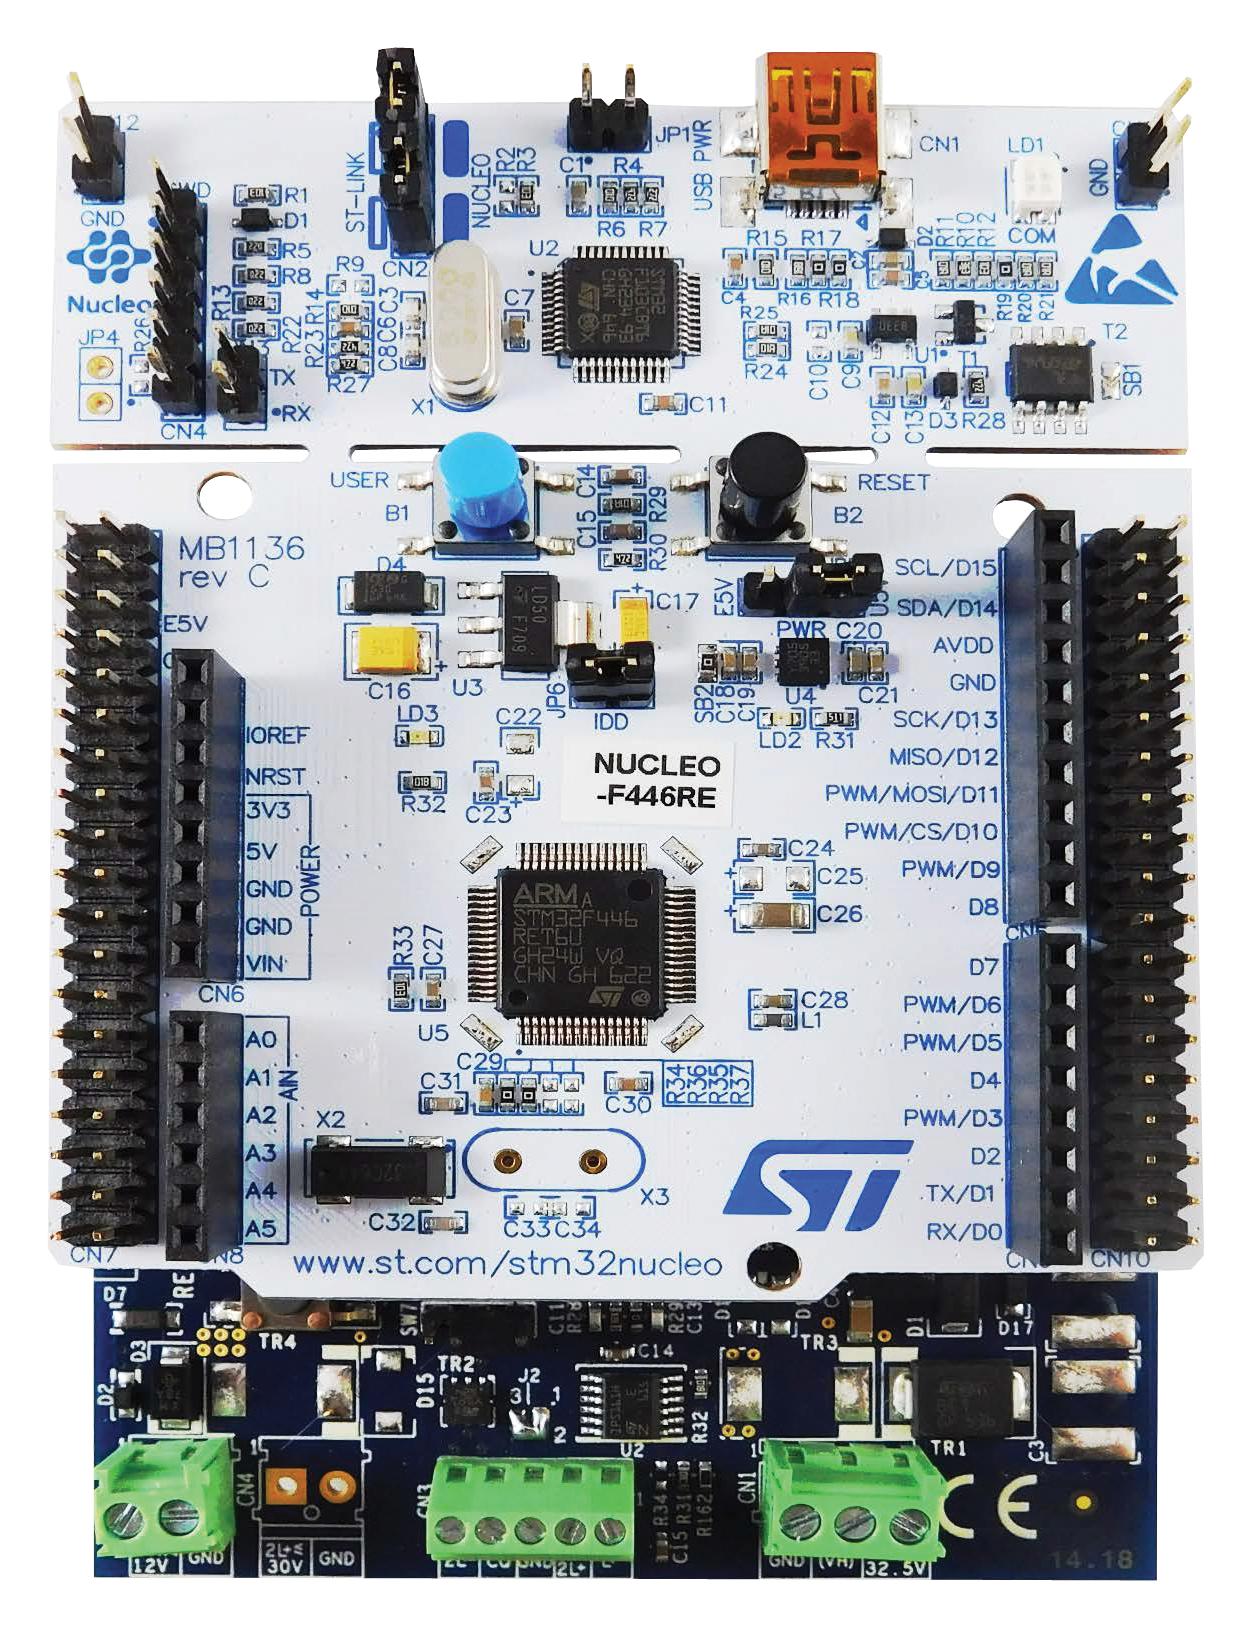 P-NUCLEO-IOM01M1 STM32 NUCLEO PACK FOR IO-LINK MASTER STMICROELECTRONICS